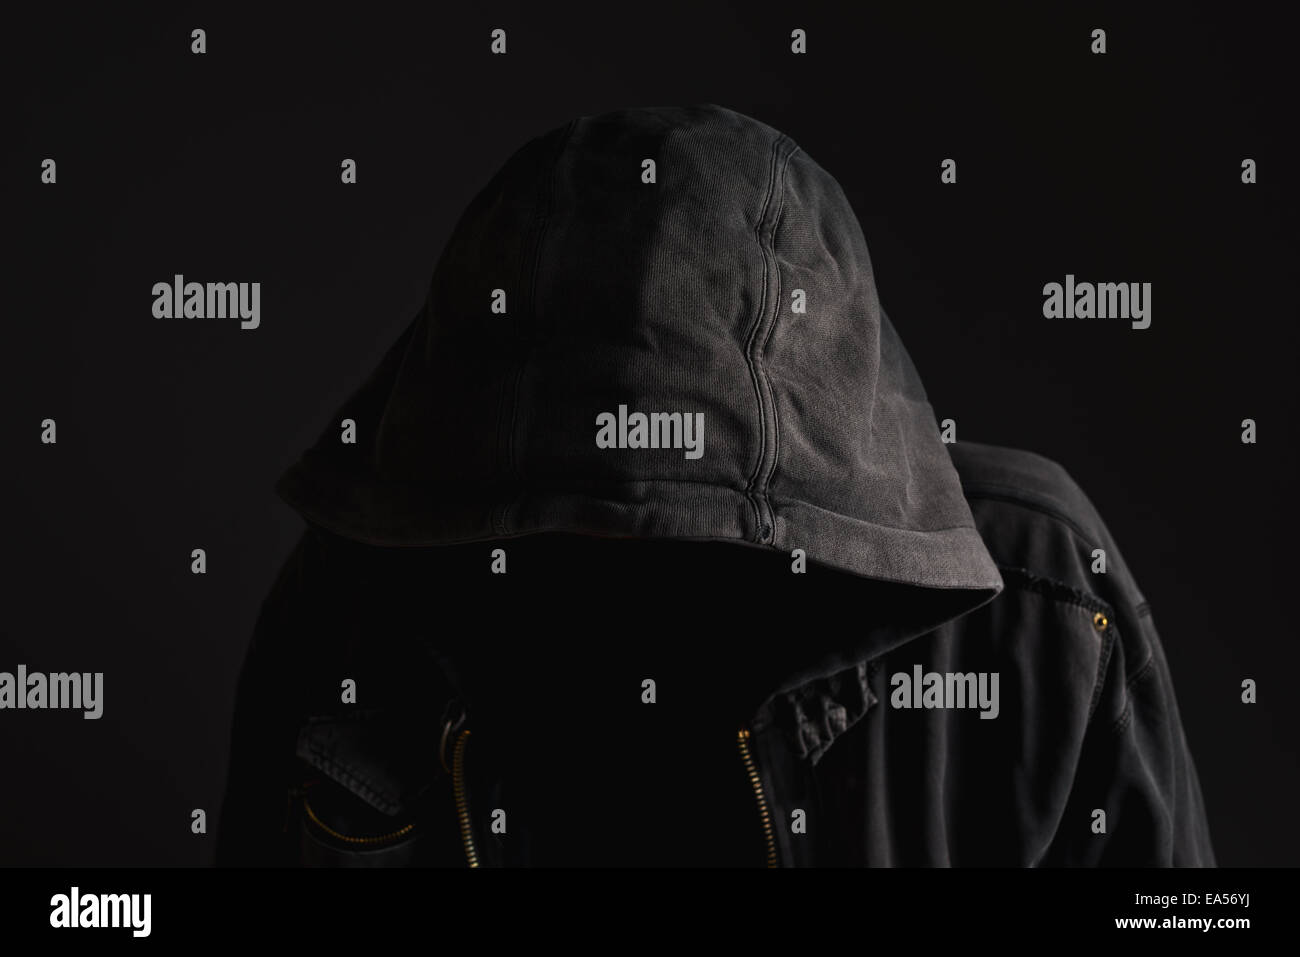 Faceless unknown and unrecognizable man without identity wearing hood in dark room, spooky criminal person. Stock Photo